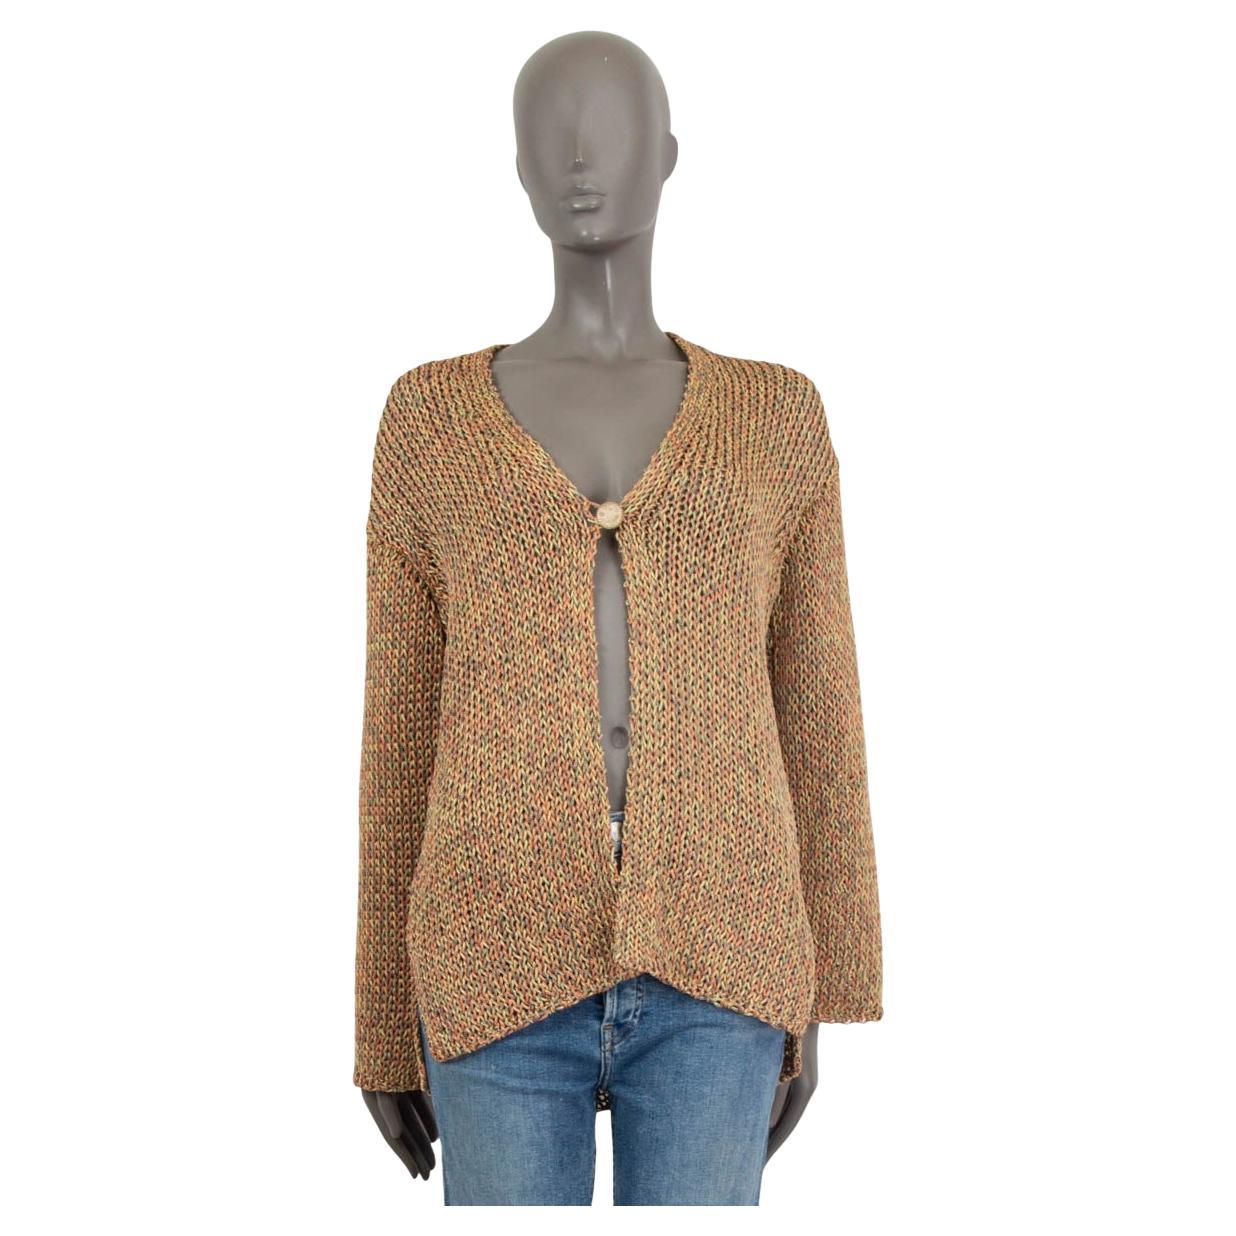 Chanel Boucle Knit Cardigan Sweater with Belt Oatmeal Tan 06P ...